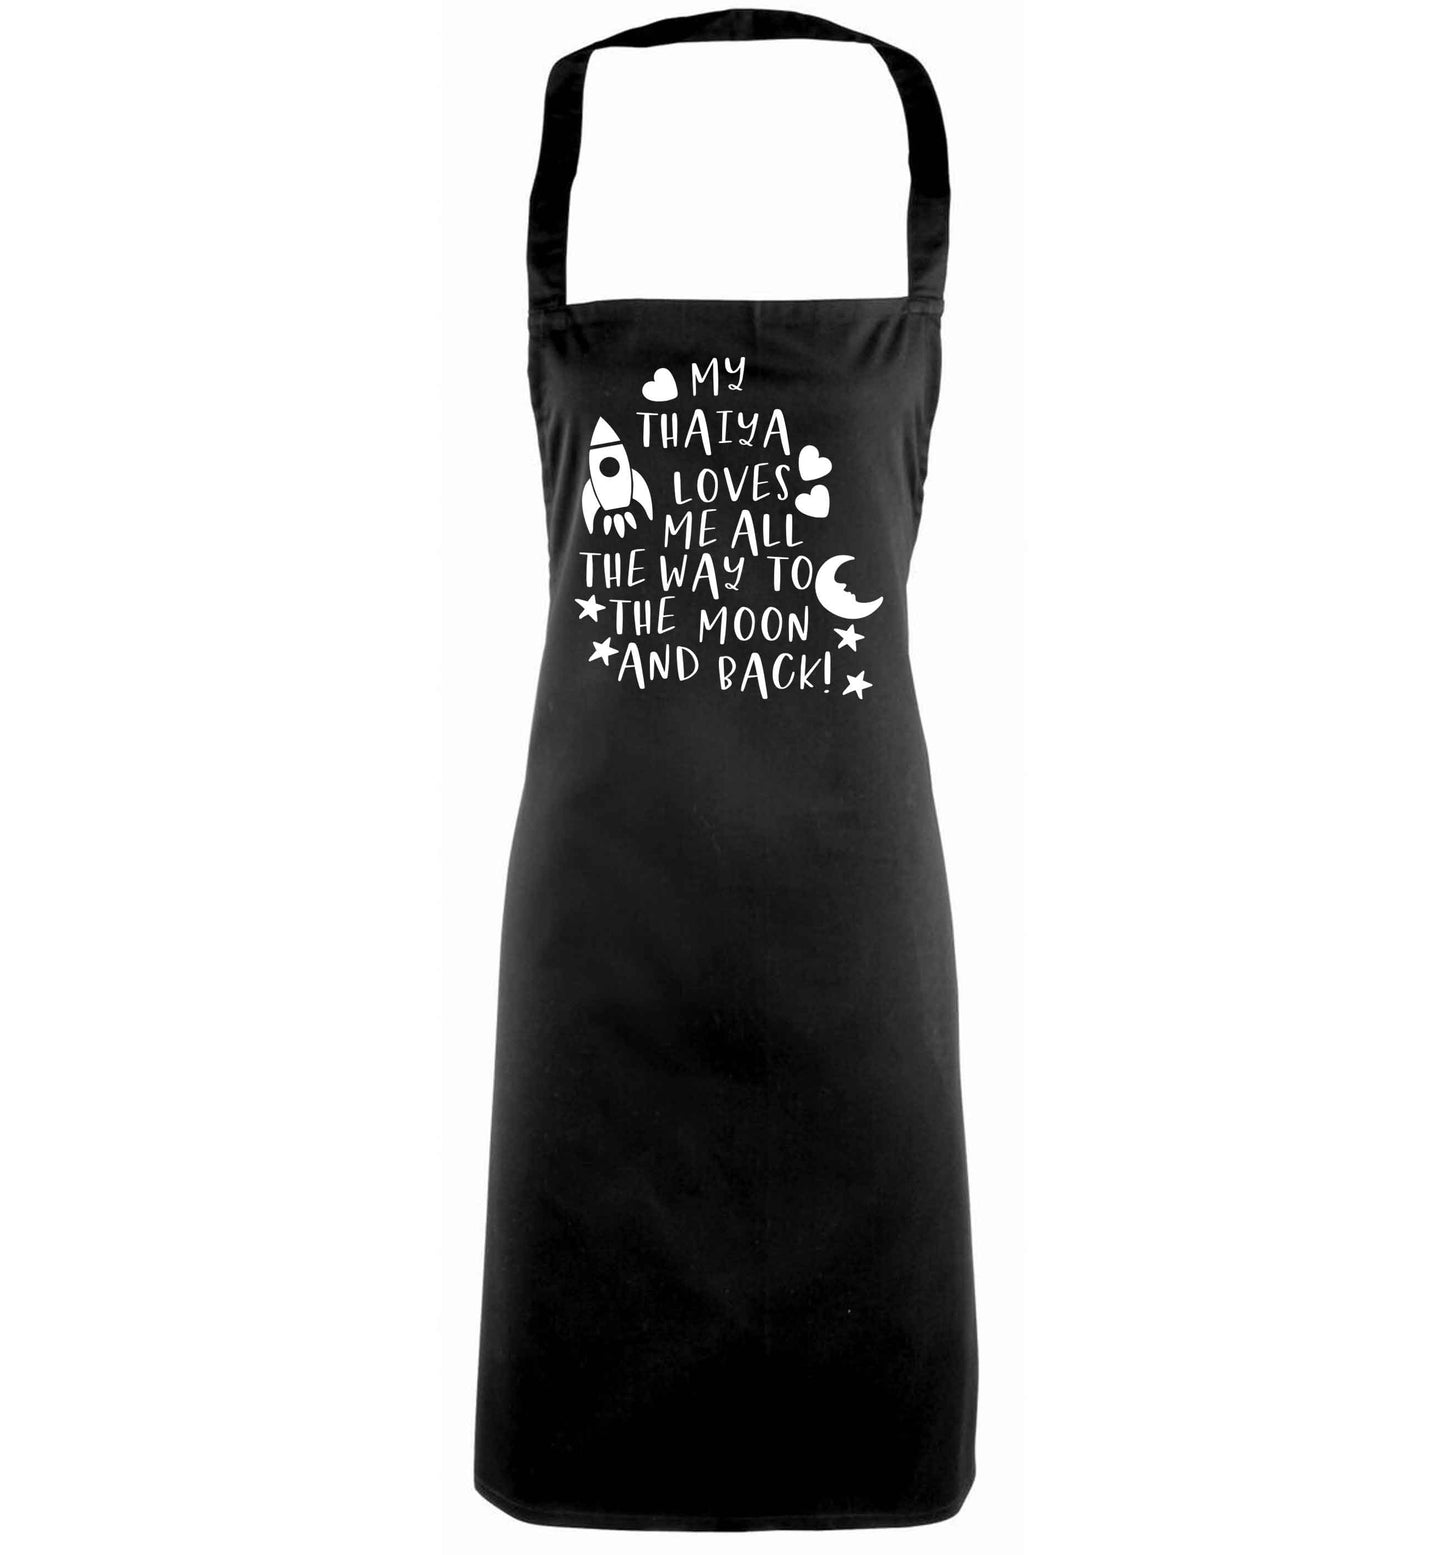 My thaiya loves me all the way to the moon and back black apron